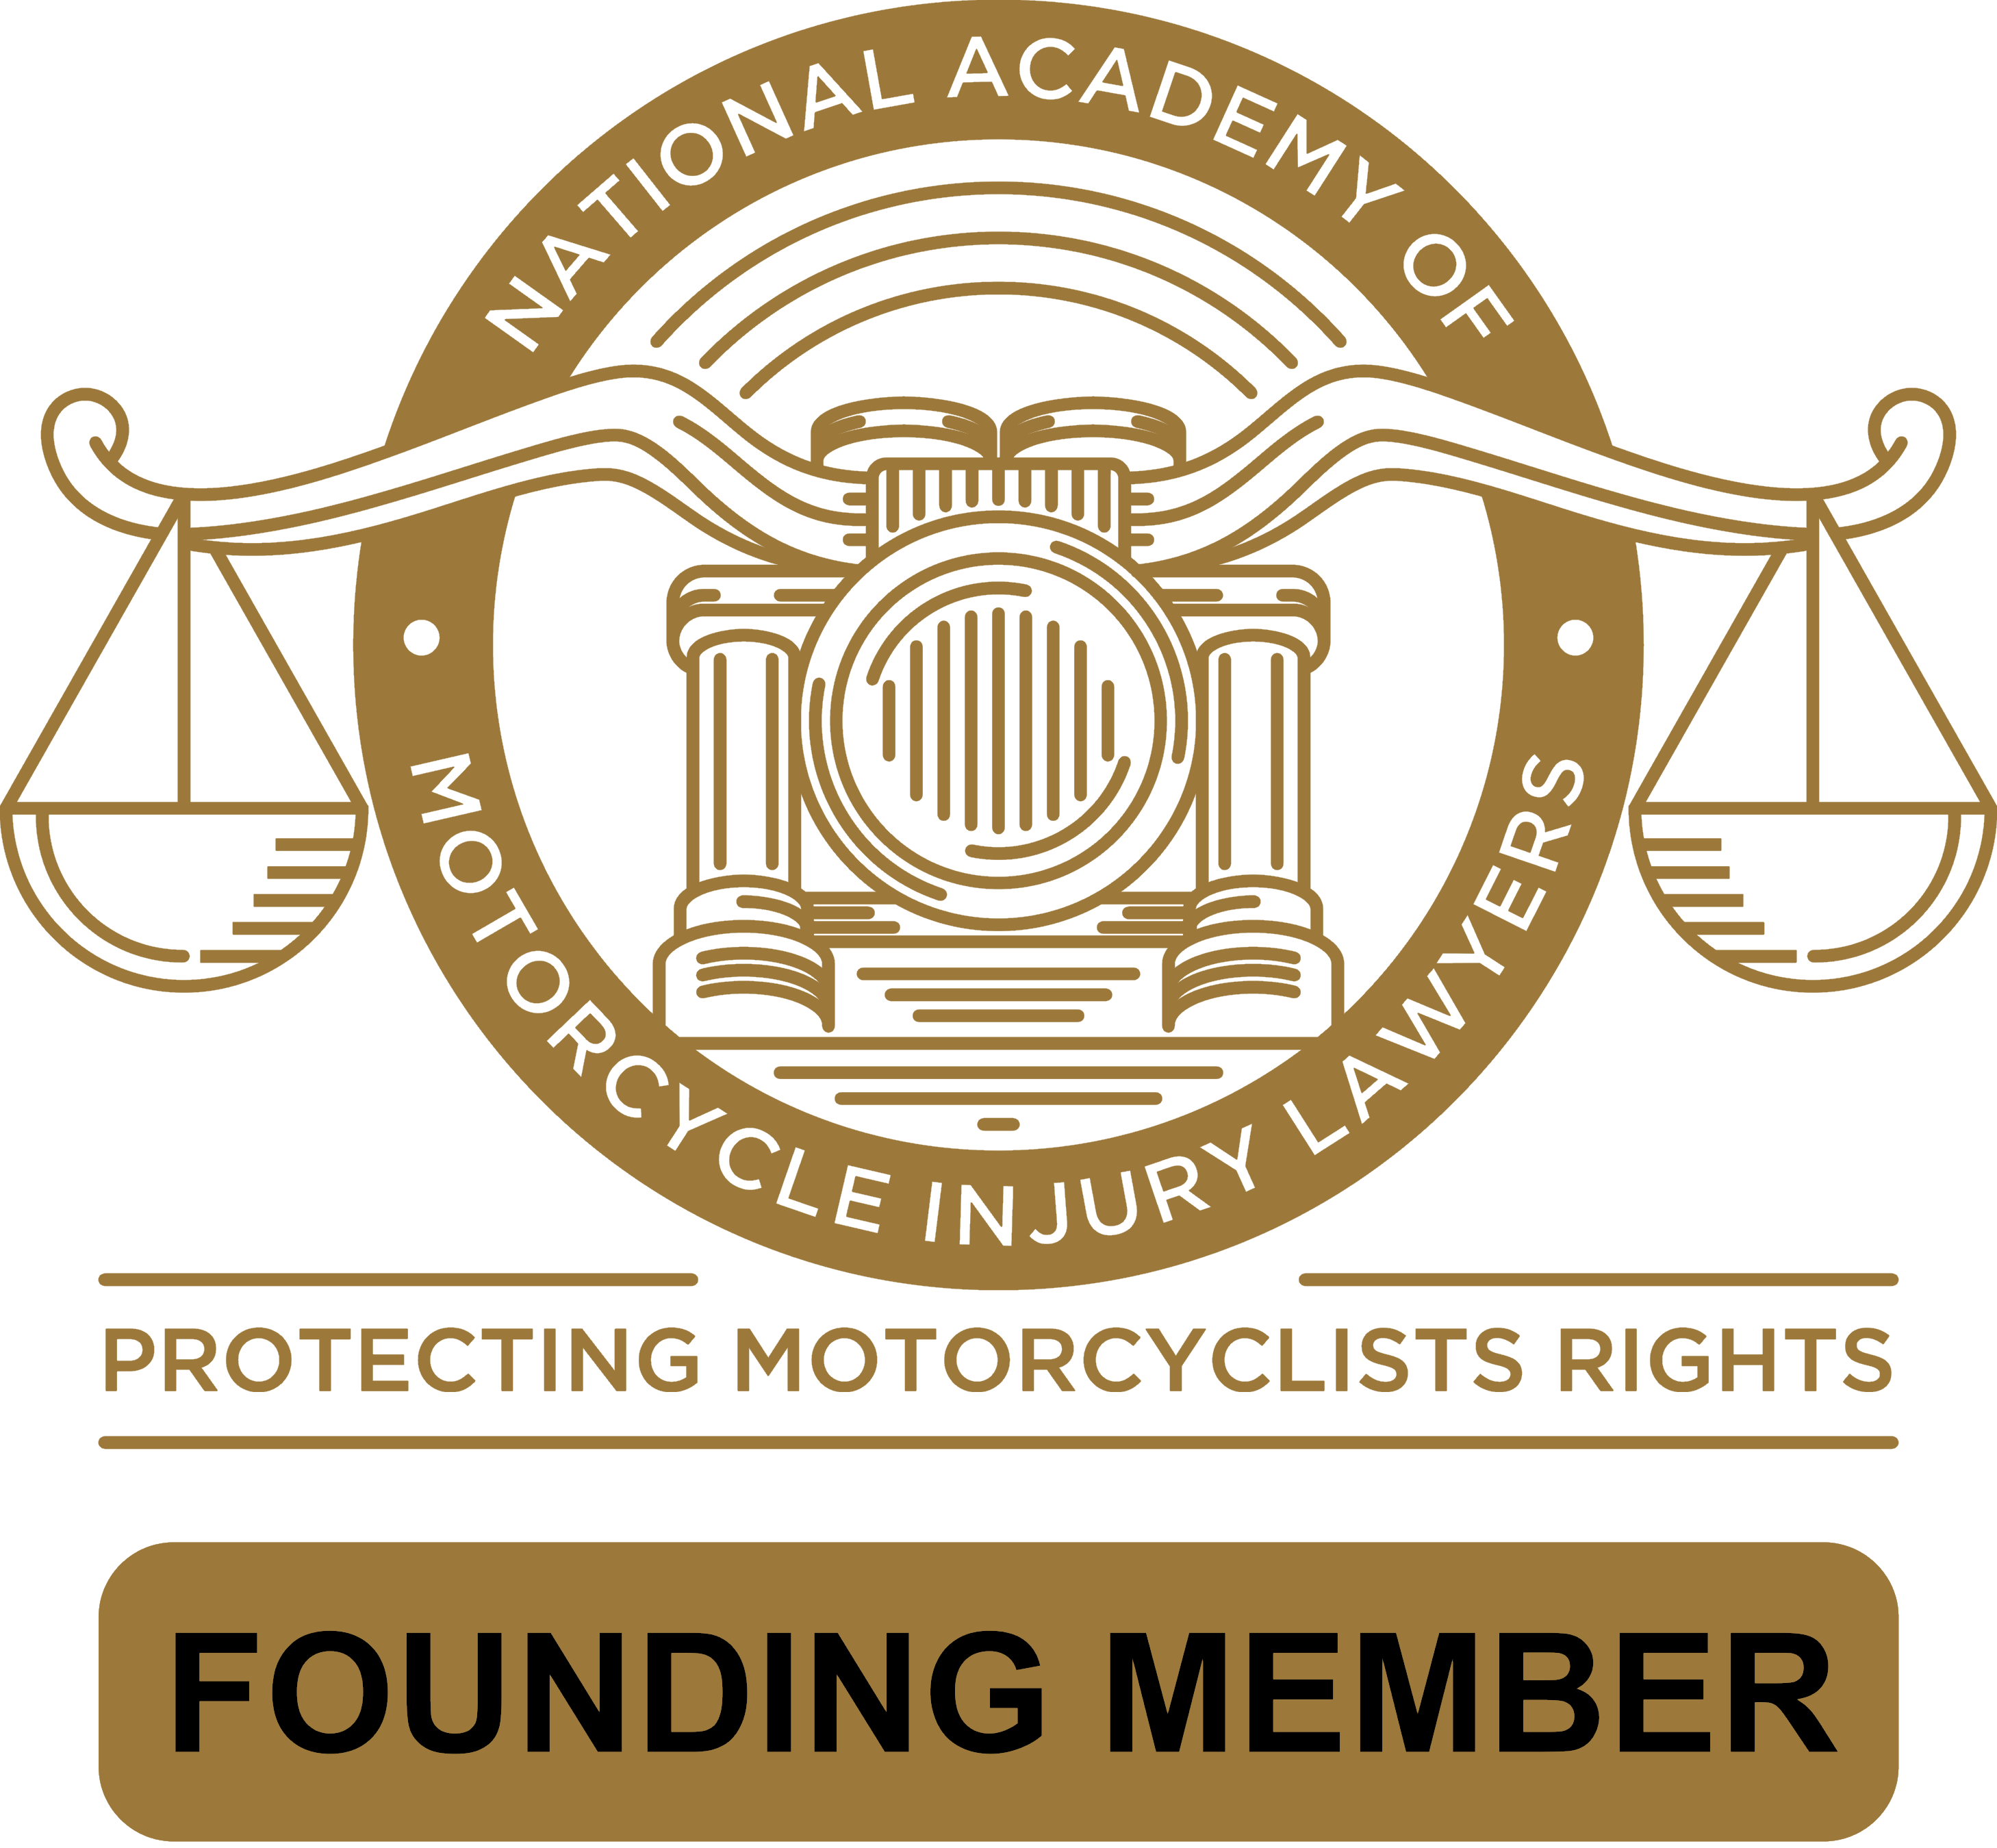 National Academy of Motorcycle Injury Lawyers Founding Member logo